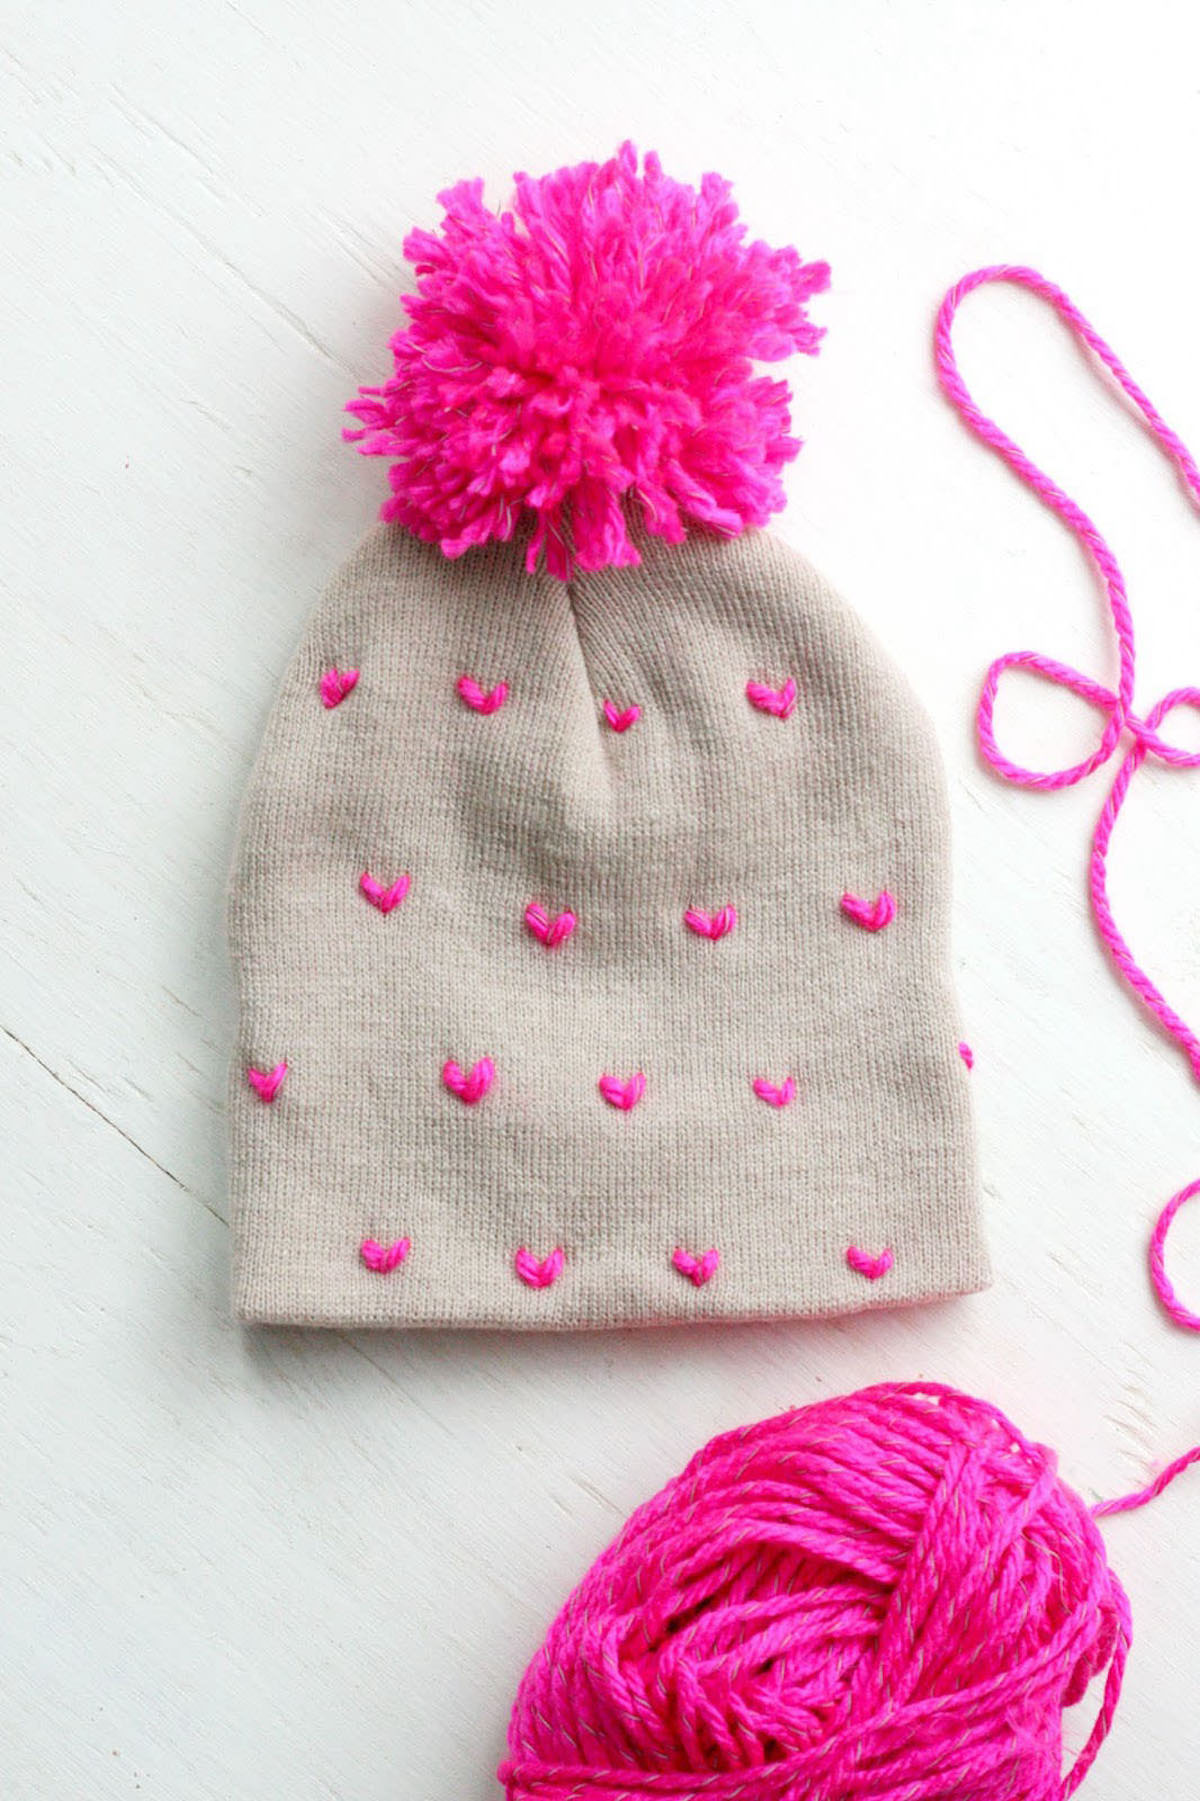 How to Make a Pompom for a Hat